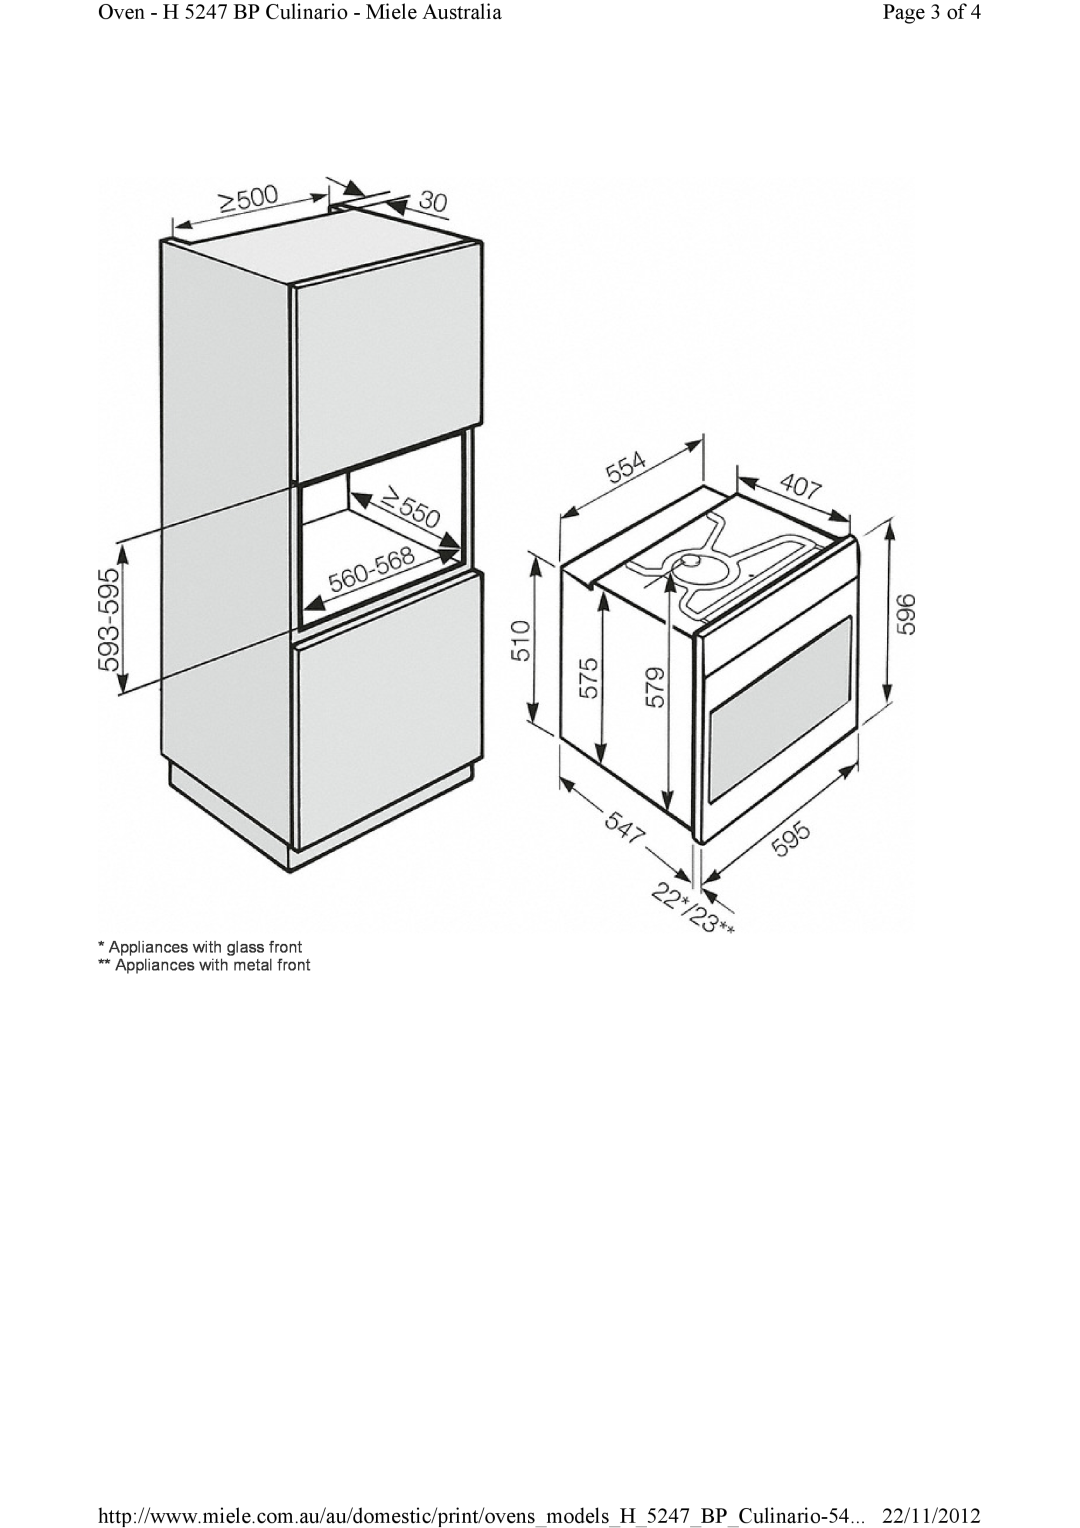 Miele installation instructions Page 3 of, Oven - H 5247 BP Culinario - Miele Australia 